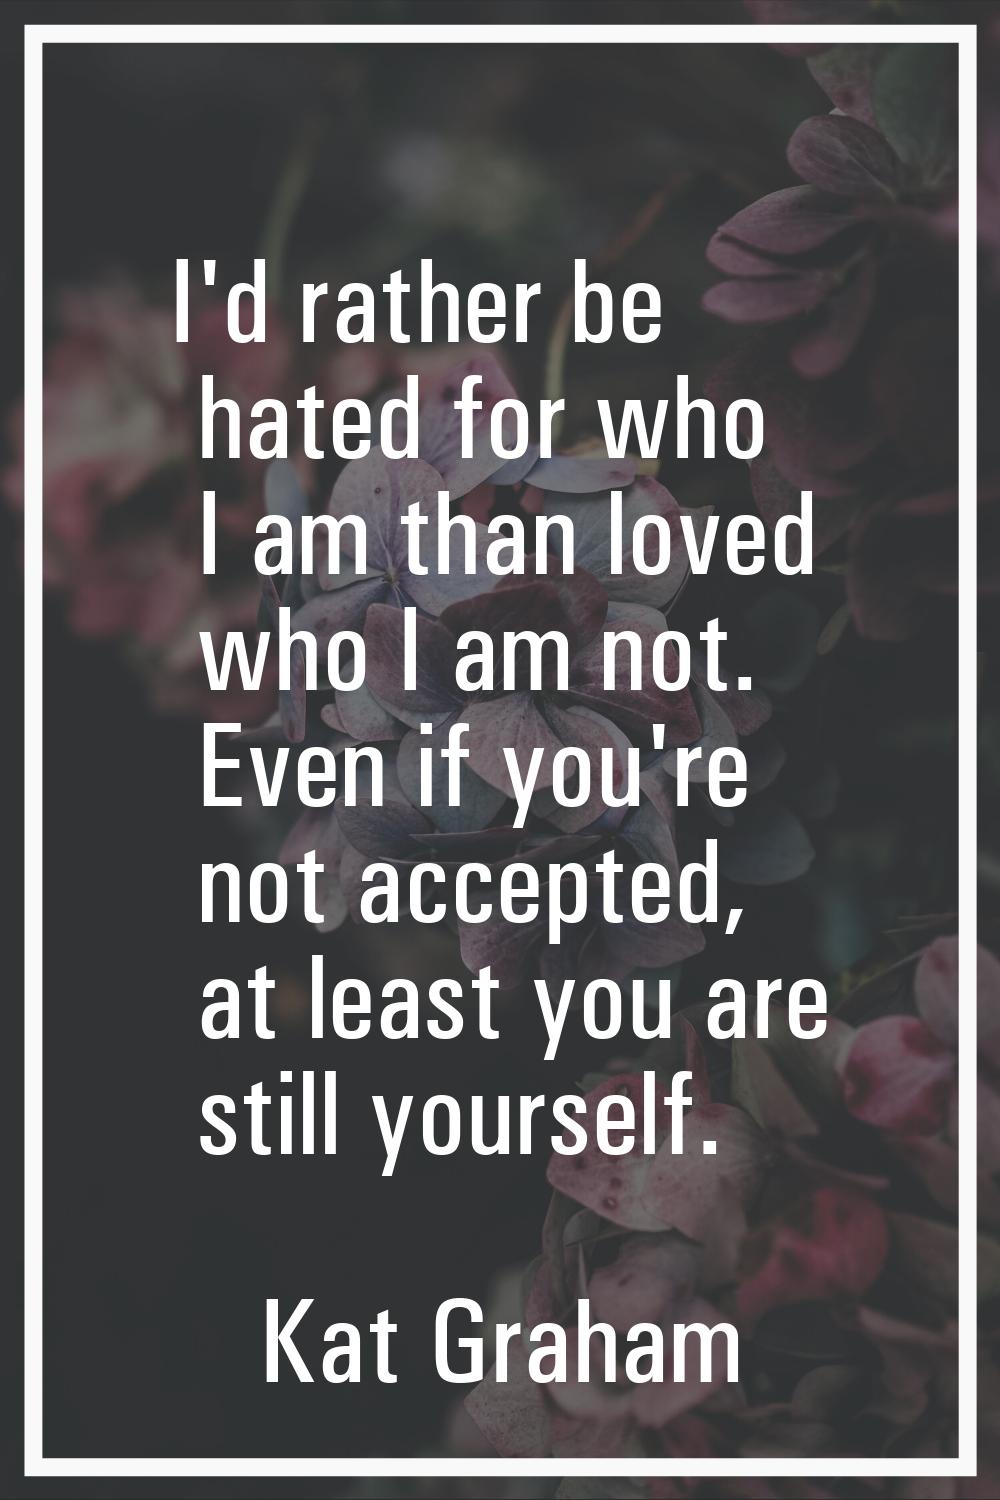 I'd rather be hated for who I am than loved who I am not. Even if you're not accepted, at least you